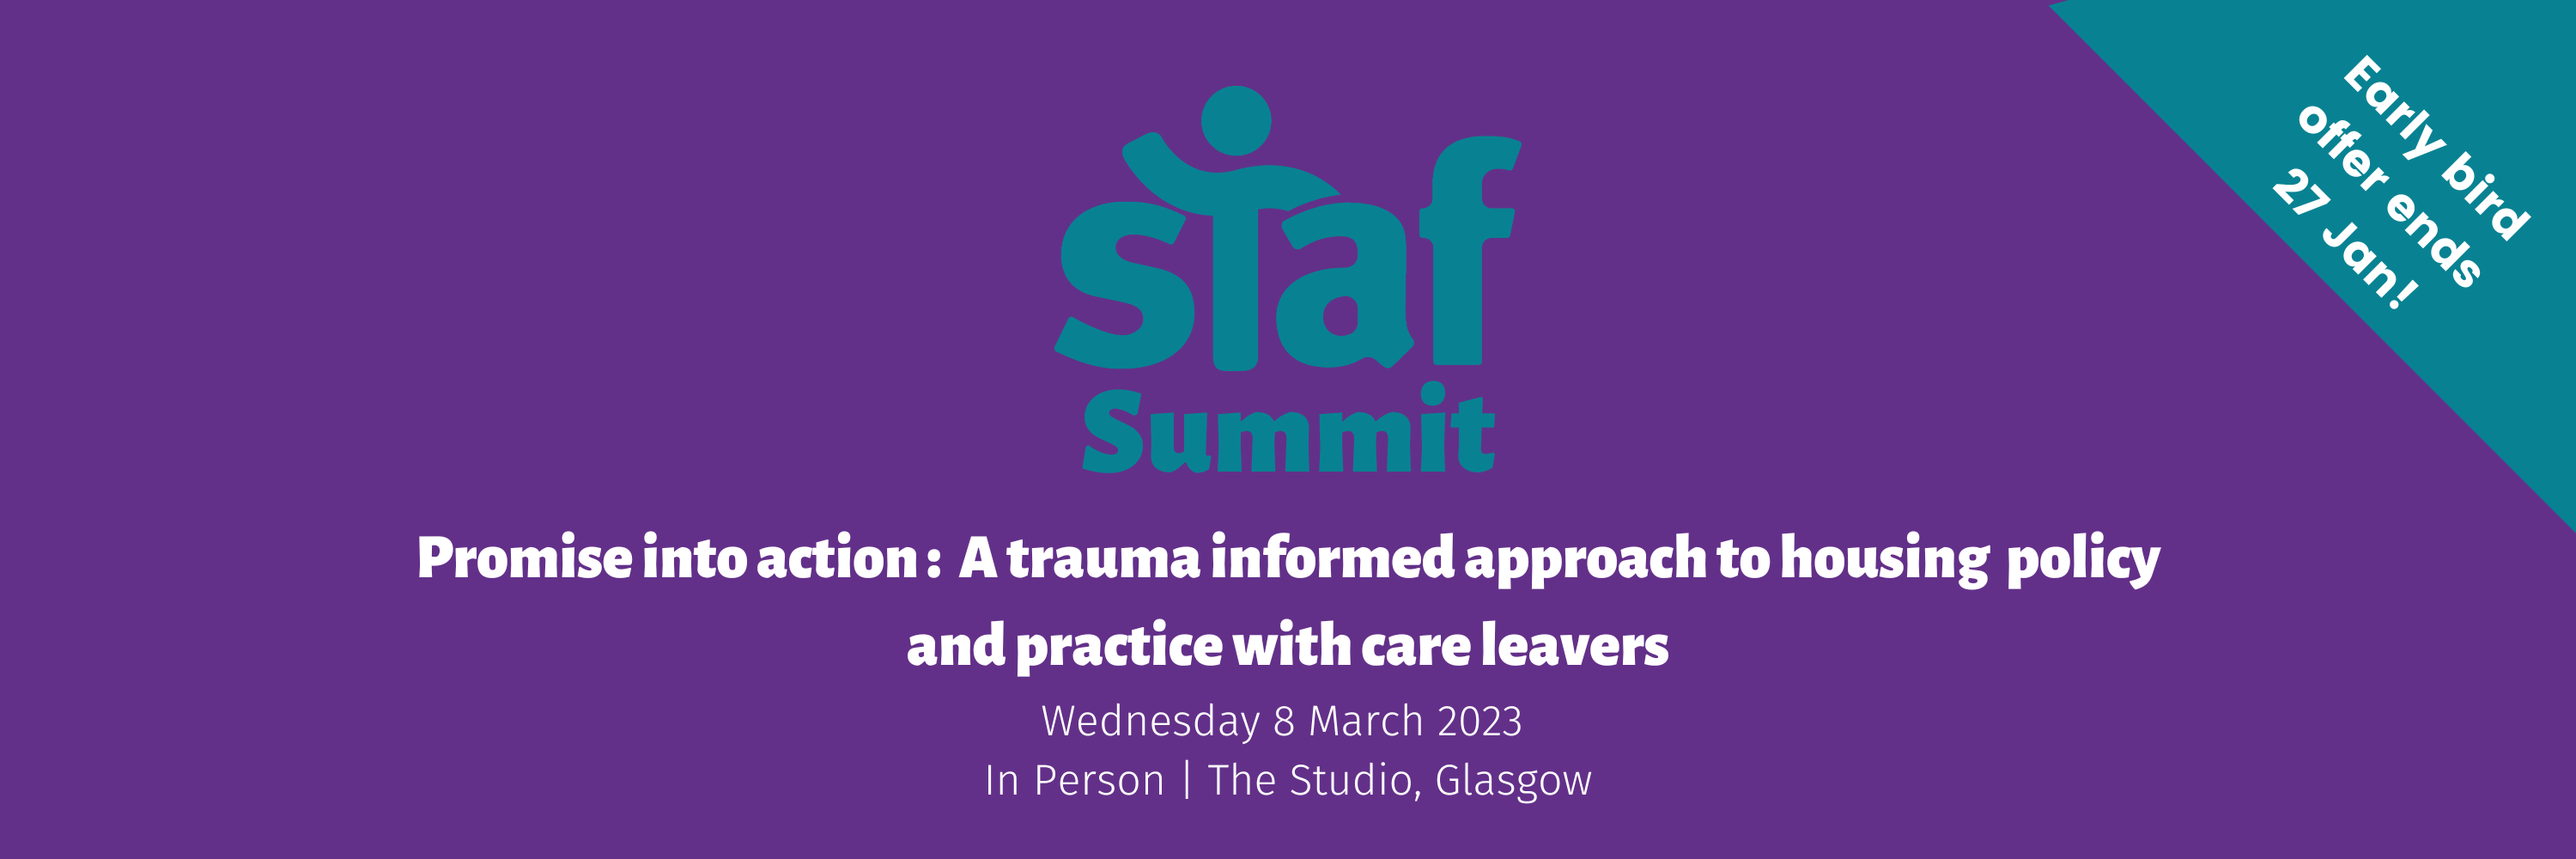 Staf Summit 23, Promise into action: A trauma informed approach to housing policy and practice for care leavers 